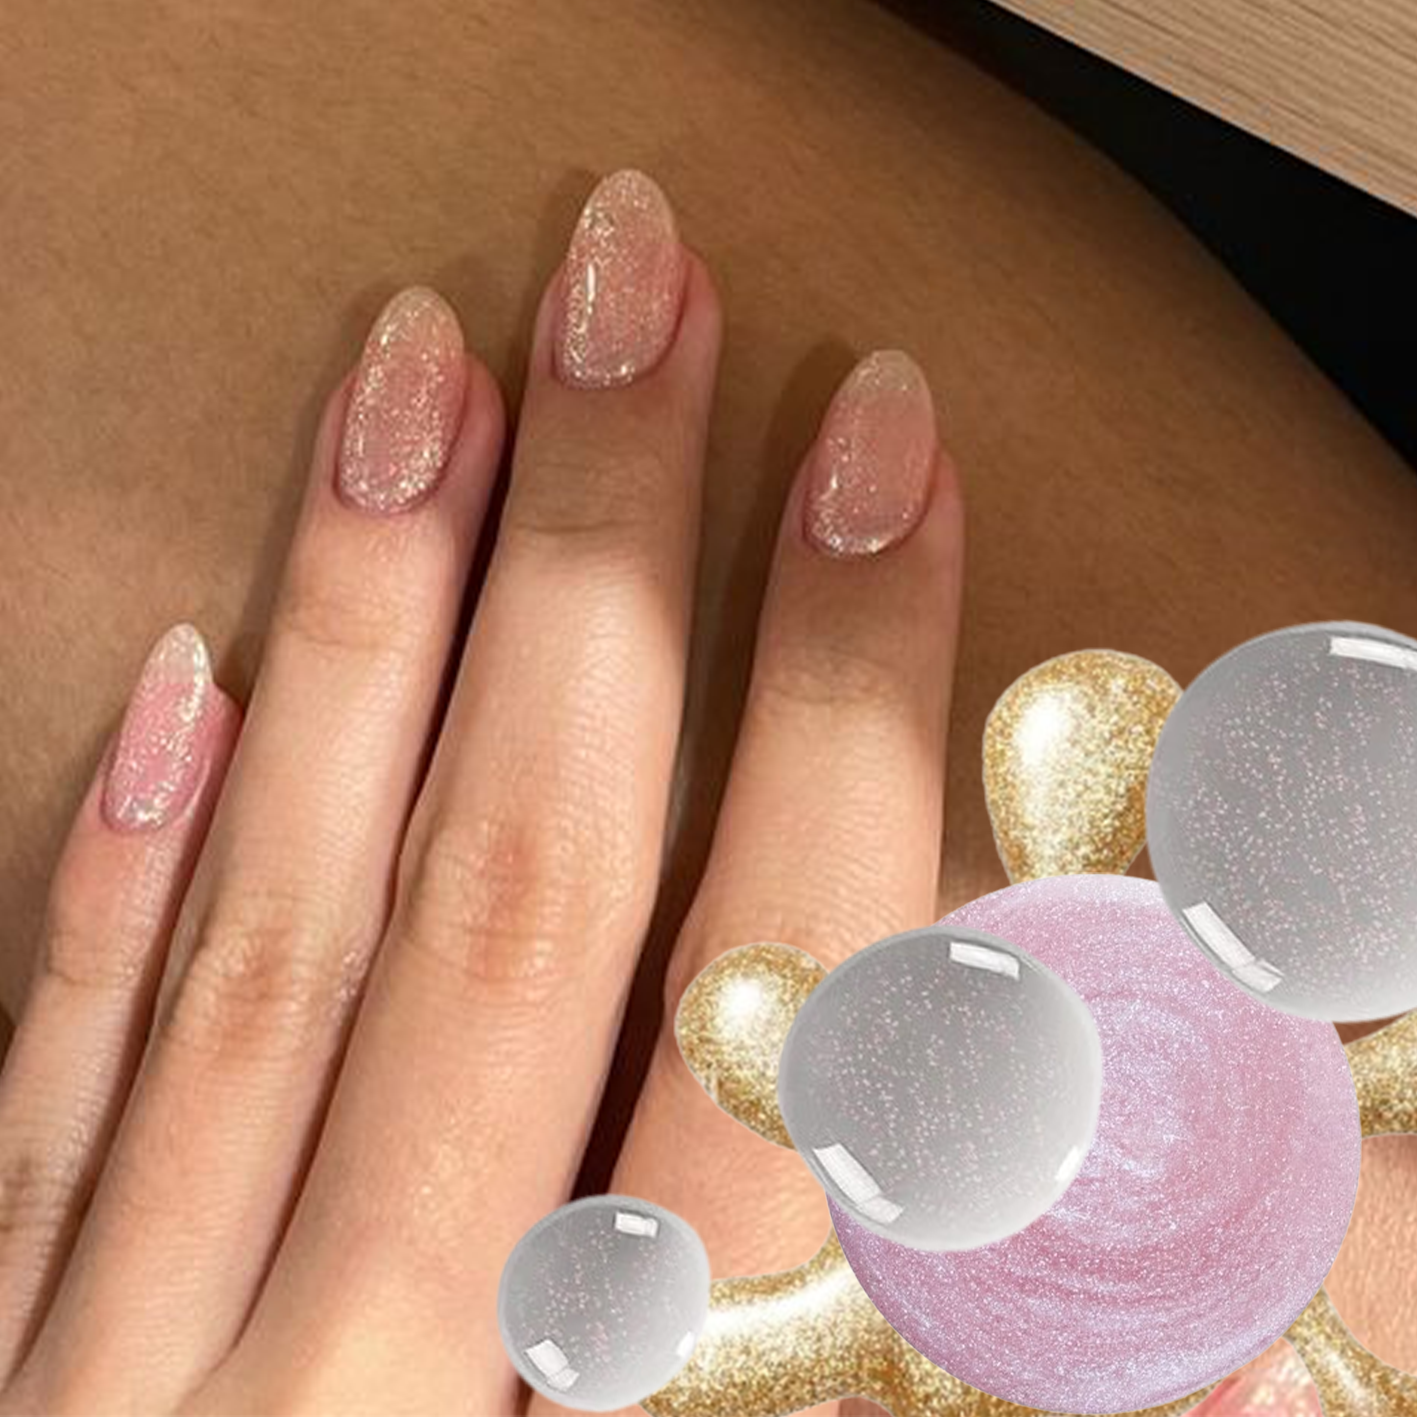 Unichrome Powder over Fairy Dust! 🦄The effect is so magical! Shop for the  Latest Trends in Nail Art at DailyCharme.com ✨ FREE US & Worldwide  Shipping... | By Daily CharmeFacebook